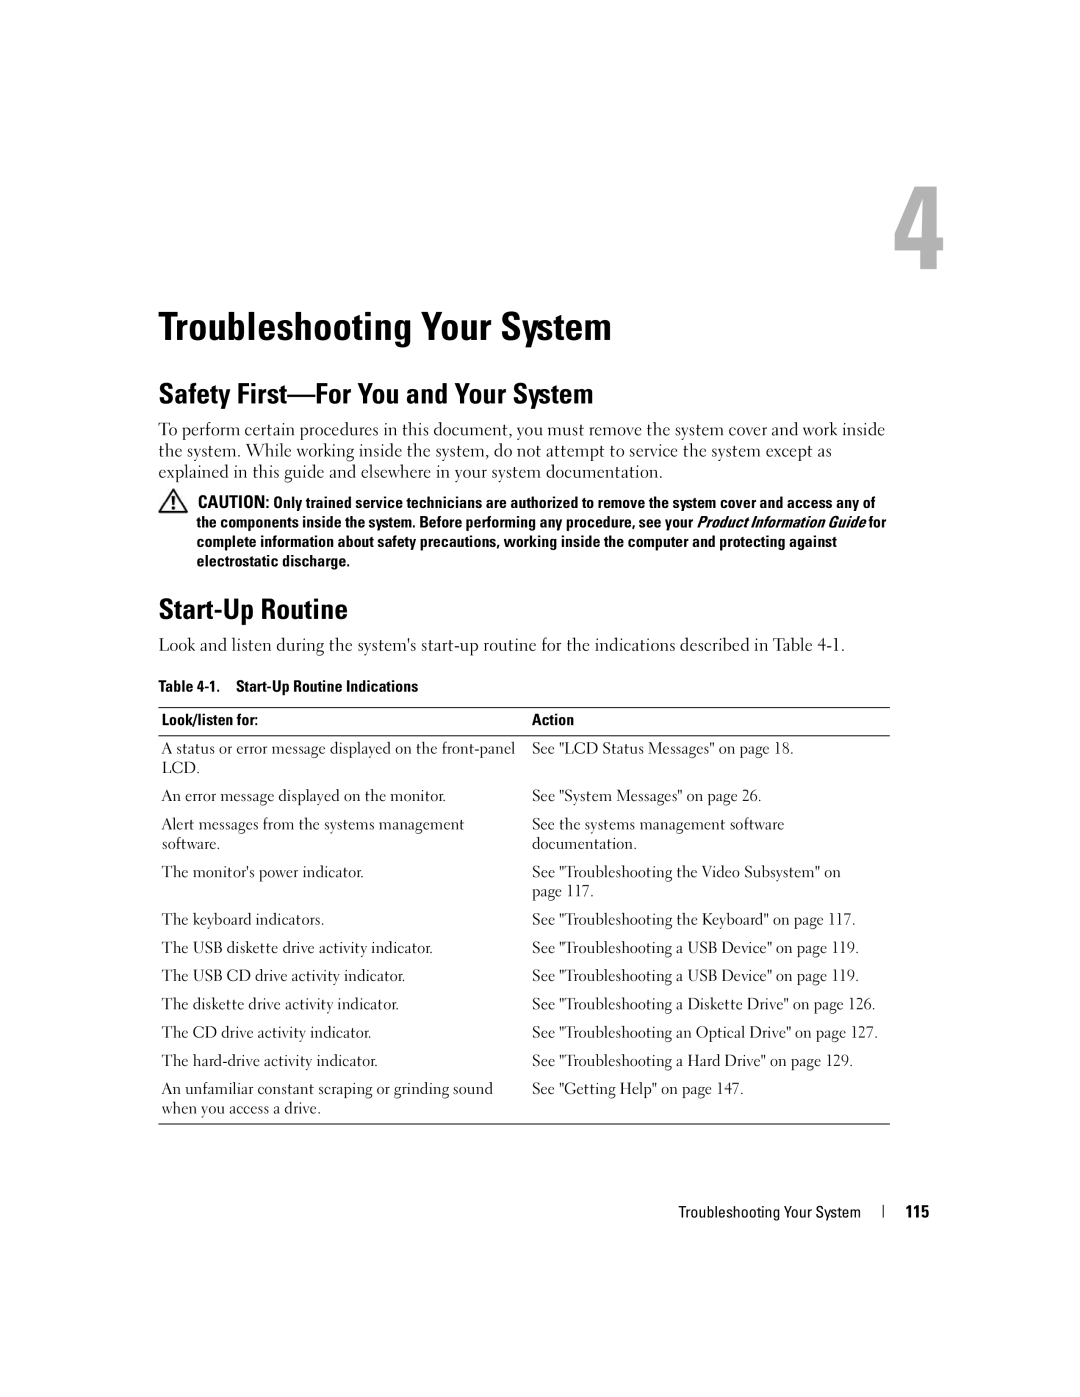 Dell 2900 owner manual Troubleshooting Your System, Safety First-For You and Your System, Start-Up Routine 